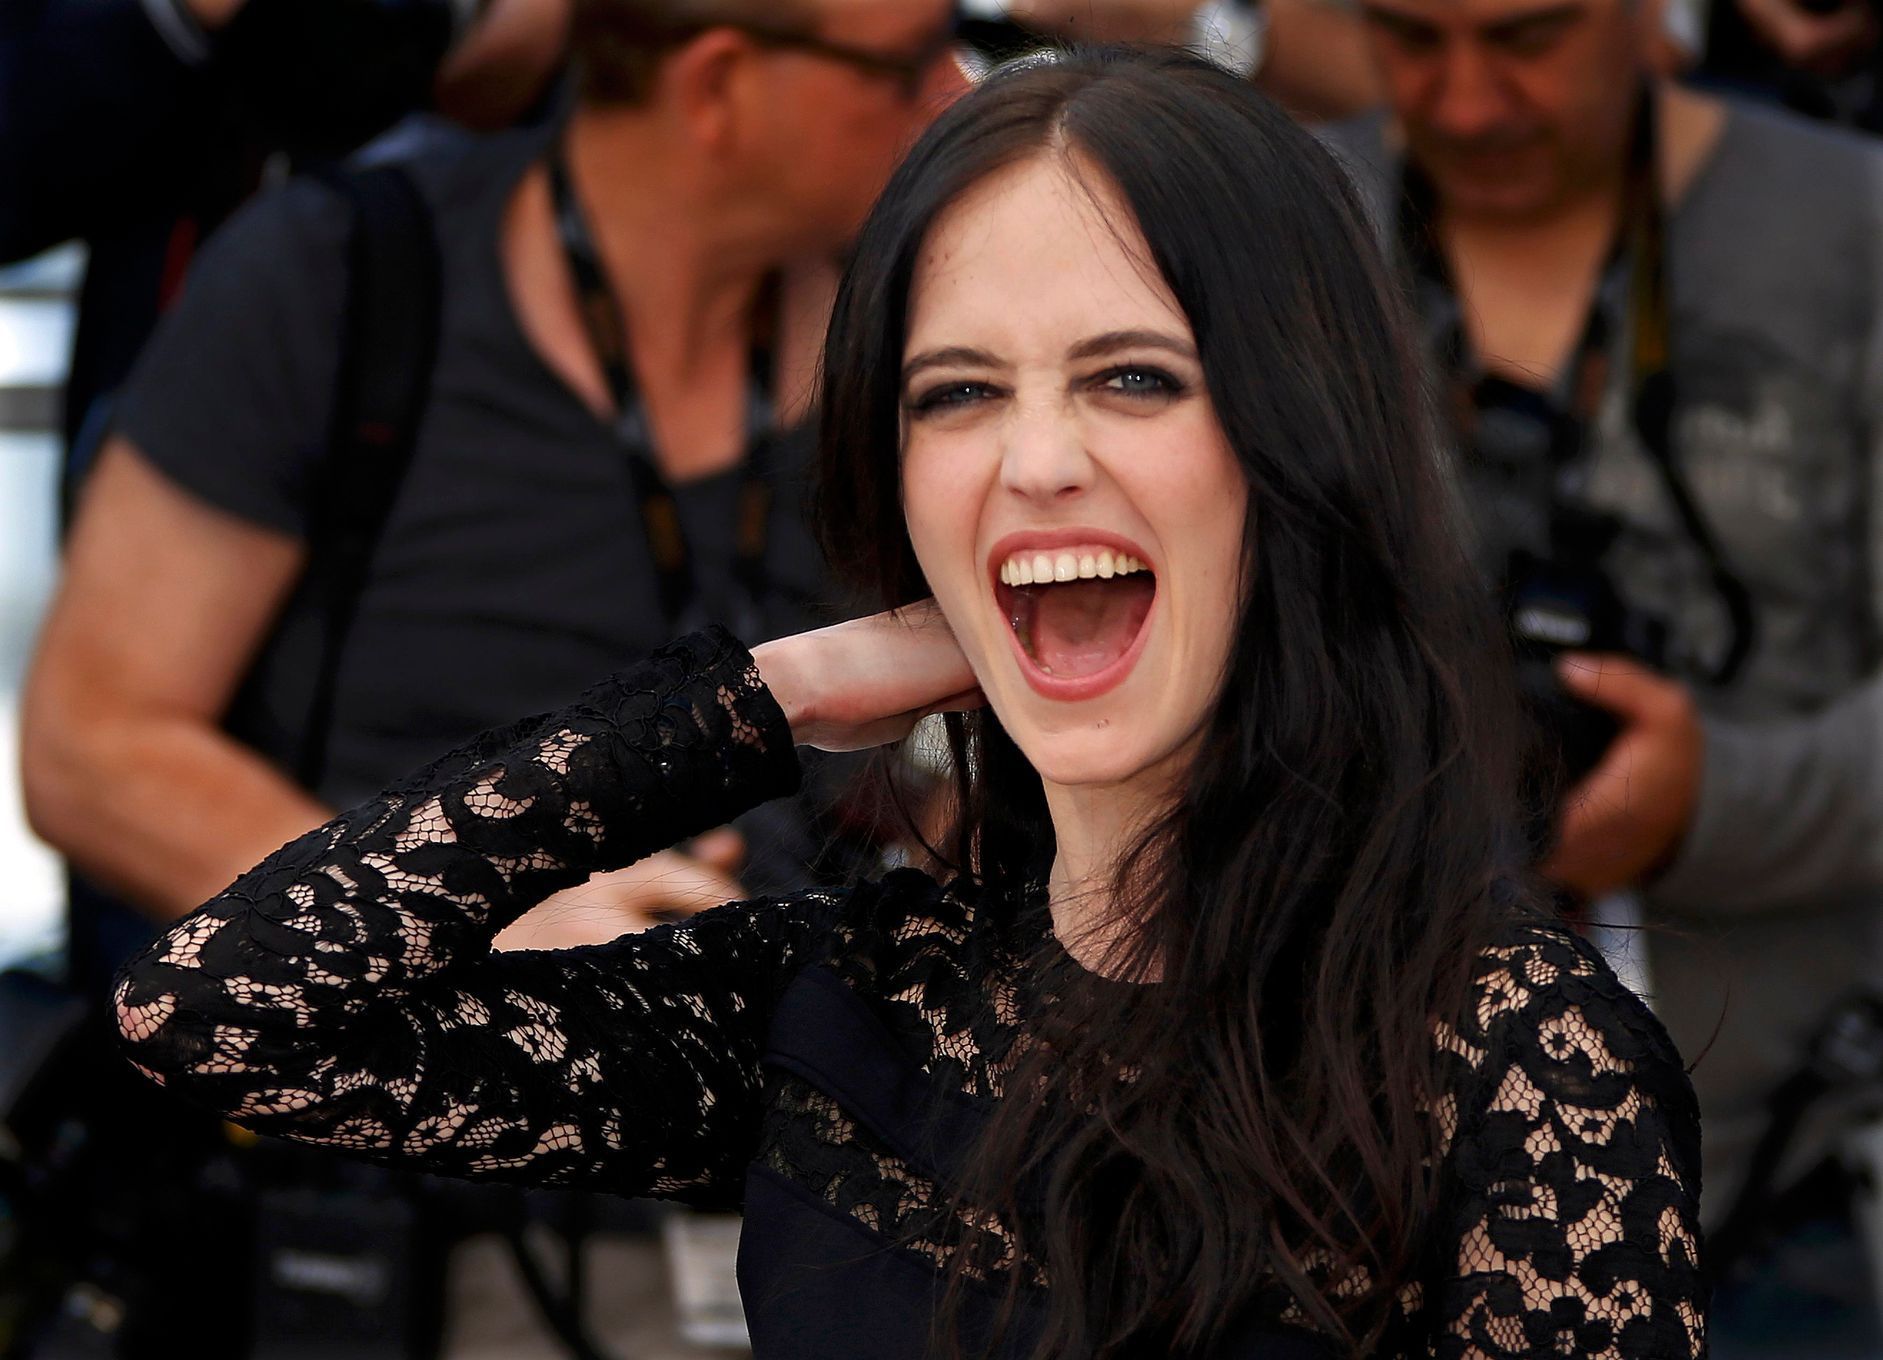 Cast member Eva Green poses during a photocall for the film &quot;The Salvation&quot; out of competition at the 67th Cannes Film Festival in Cannes